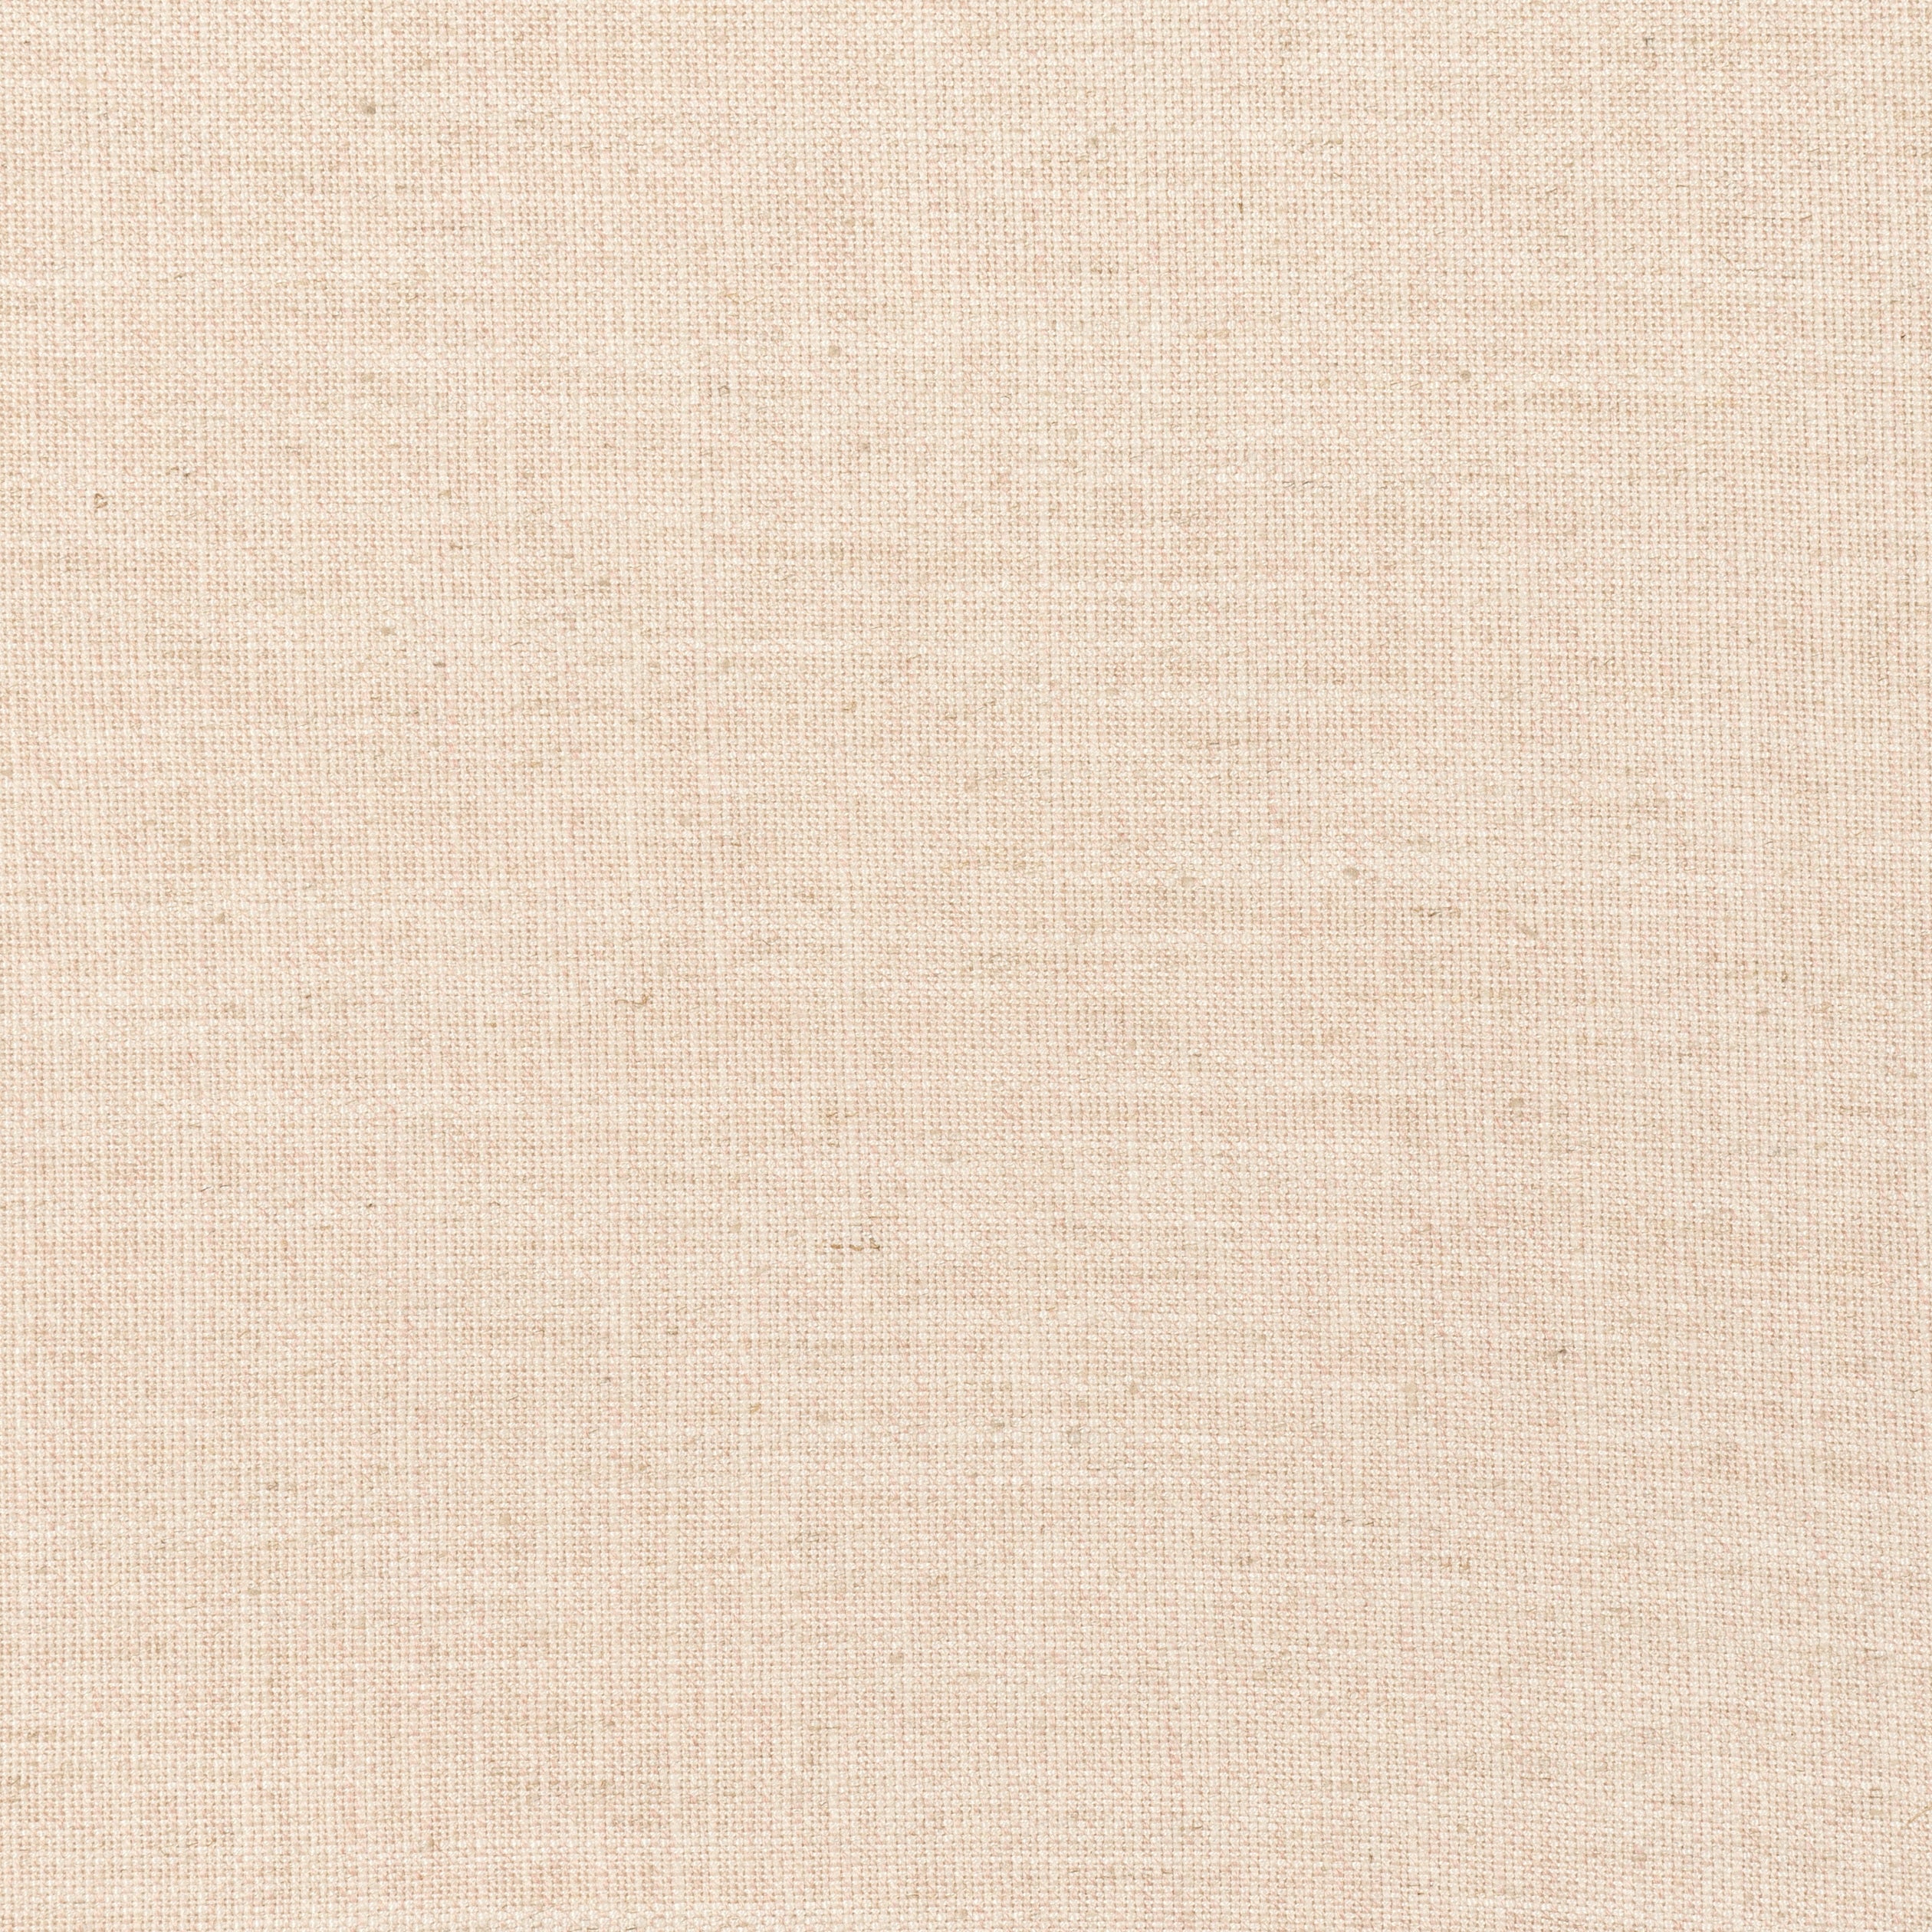 Terra Linen fabric in blush color - pattern number FWW7687 - by Thibaut in the Palisades collection